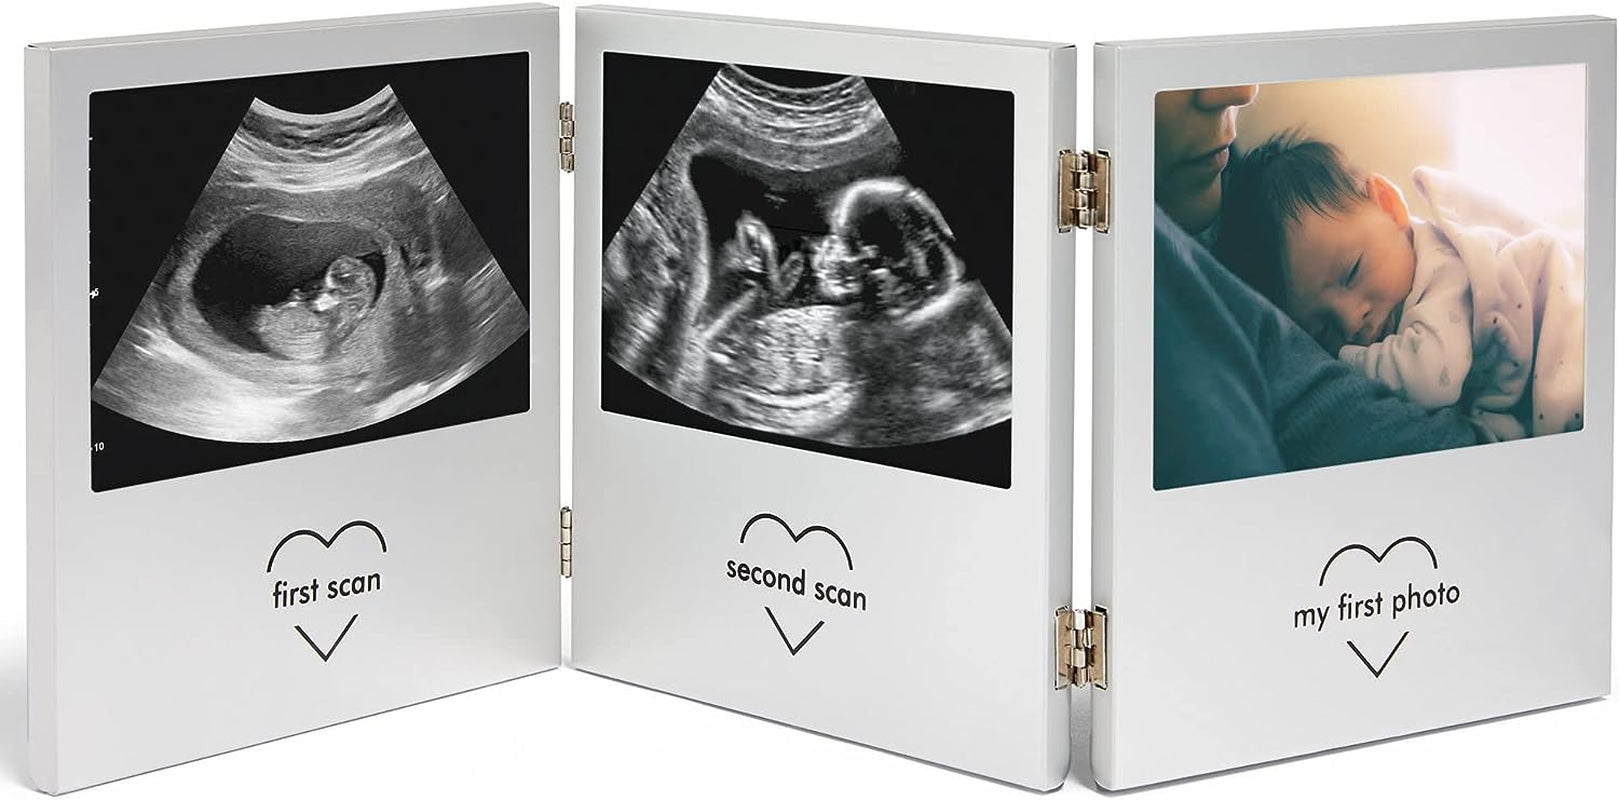 Baby Scan Photo Frame, Multi-Photo Picture Frame for Gender Reveal or Baby Shower, Ultrasound Photo Frame Present for New Mums, Double Hinged Stainless Steel Frame with 3 Photo Apertures